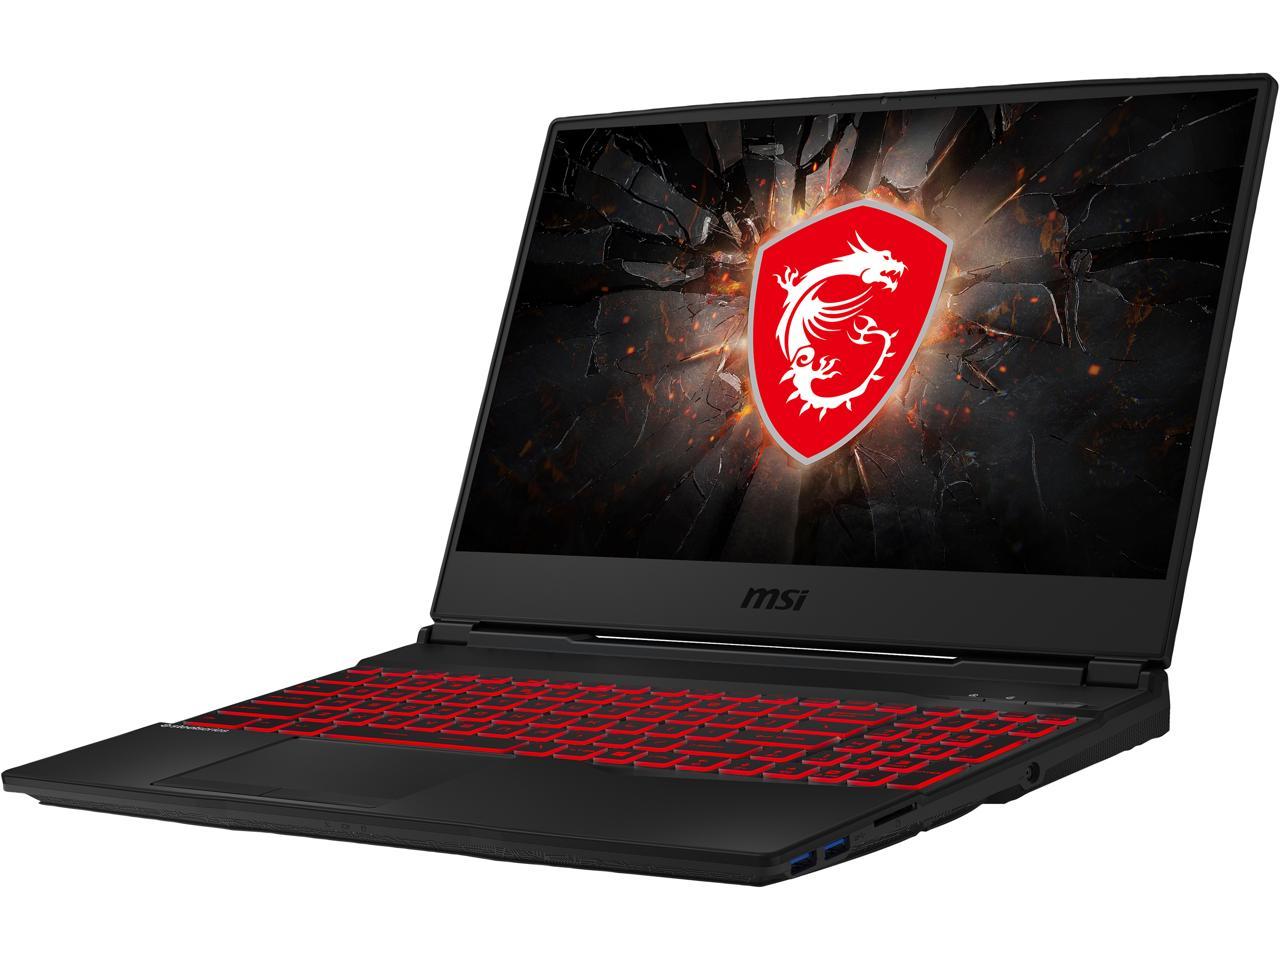 MSI GL65 with Core i5-9300H, GTX 1650 GPU, GB SSD is $599 right now after rebates - NotebookCheck.net News